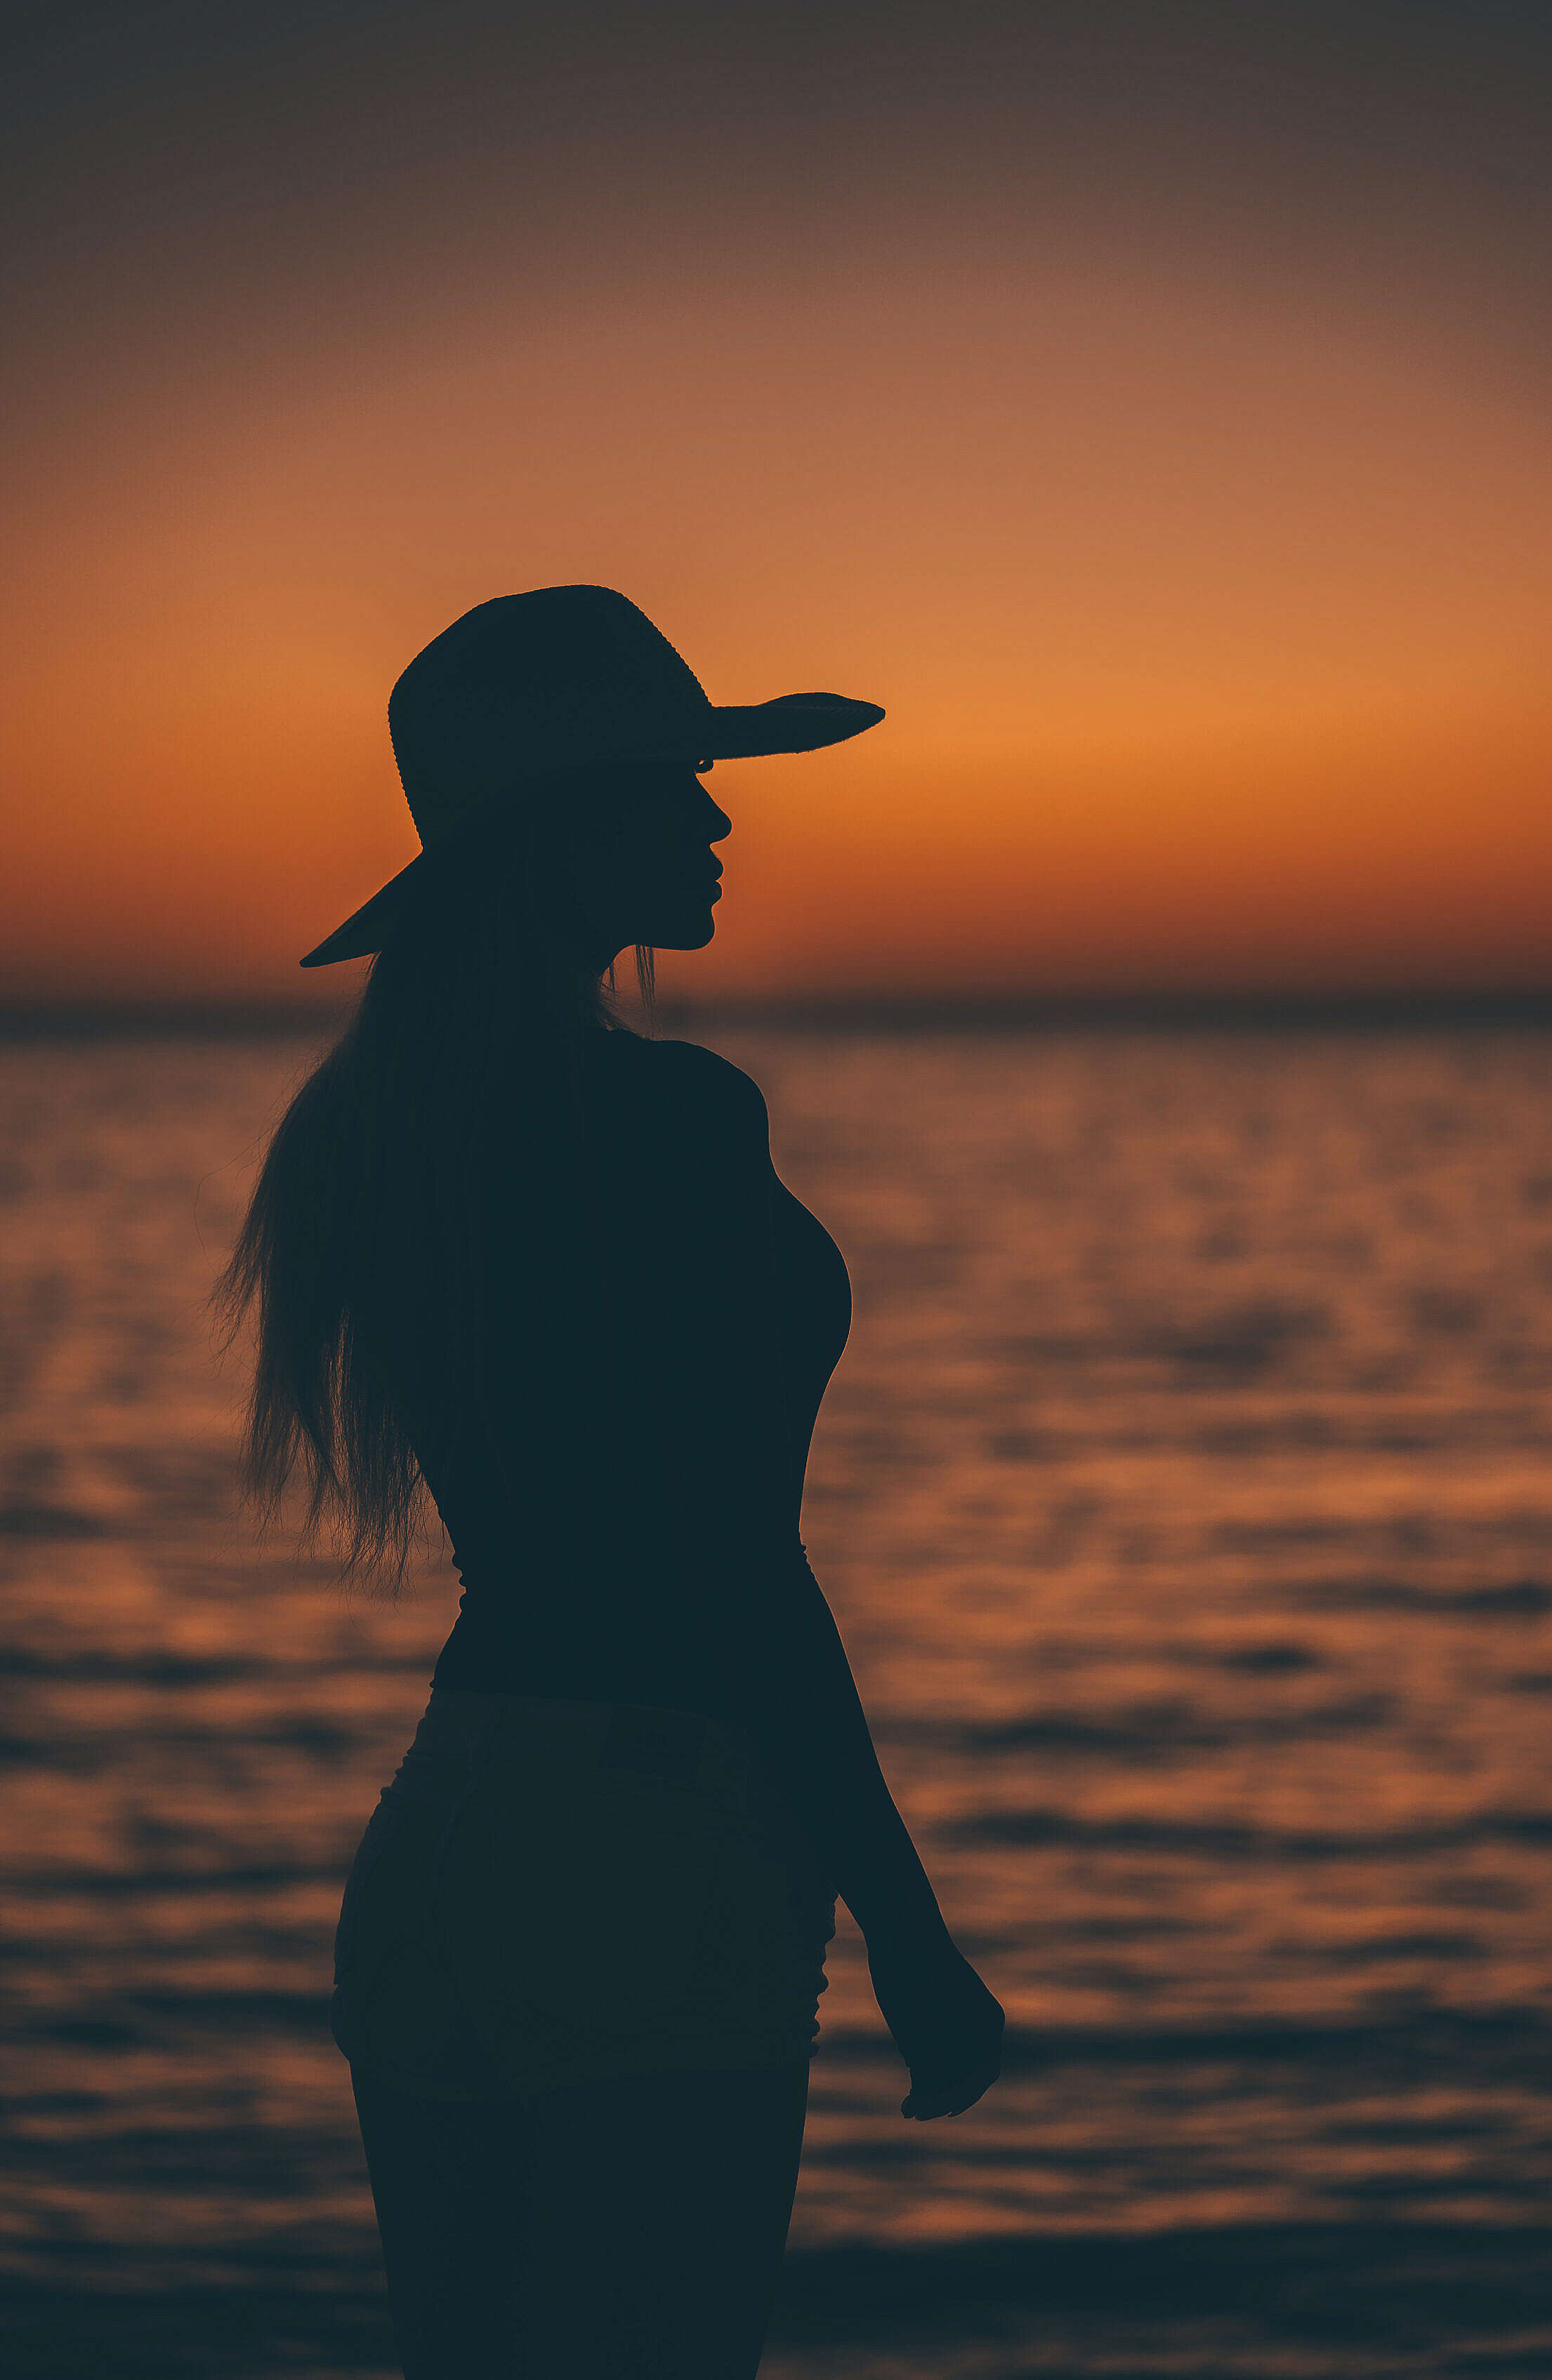 Silhouette of a Woman After Sunset by the Sea Free Stock Photo